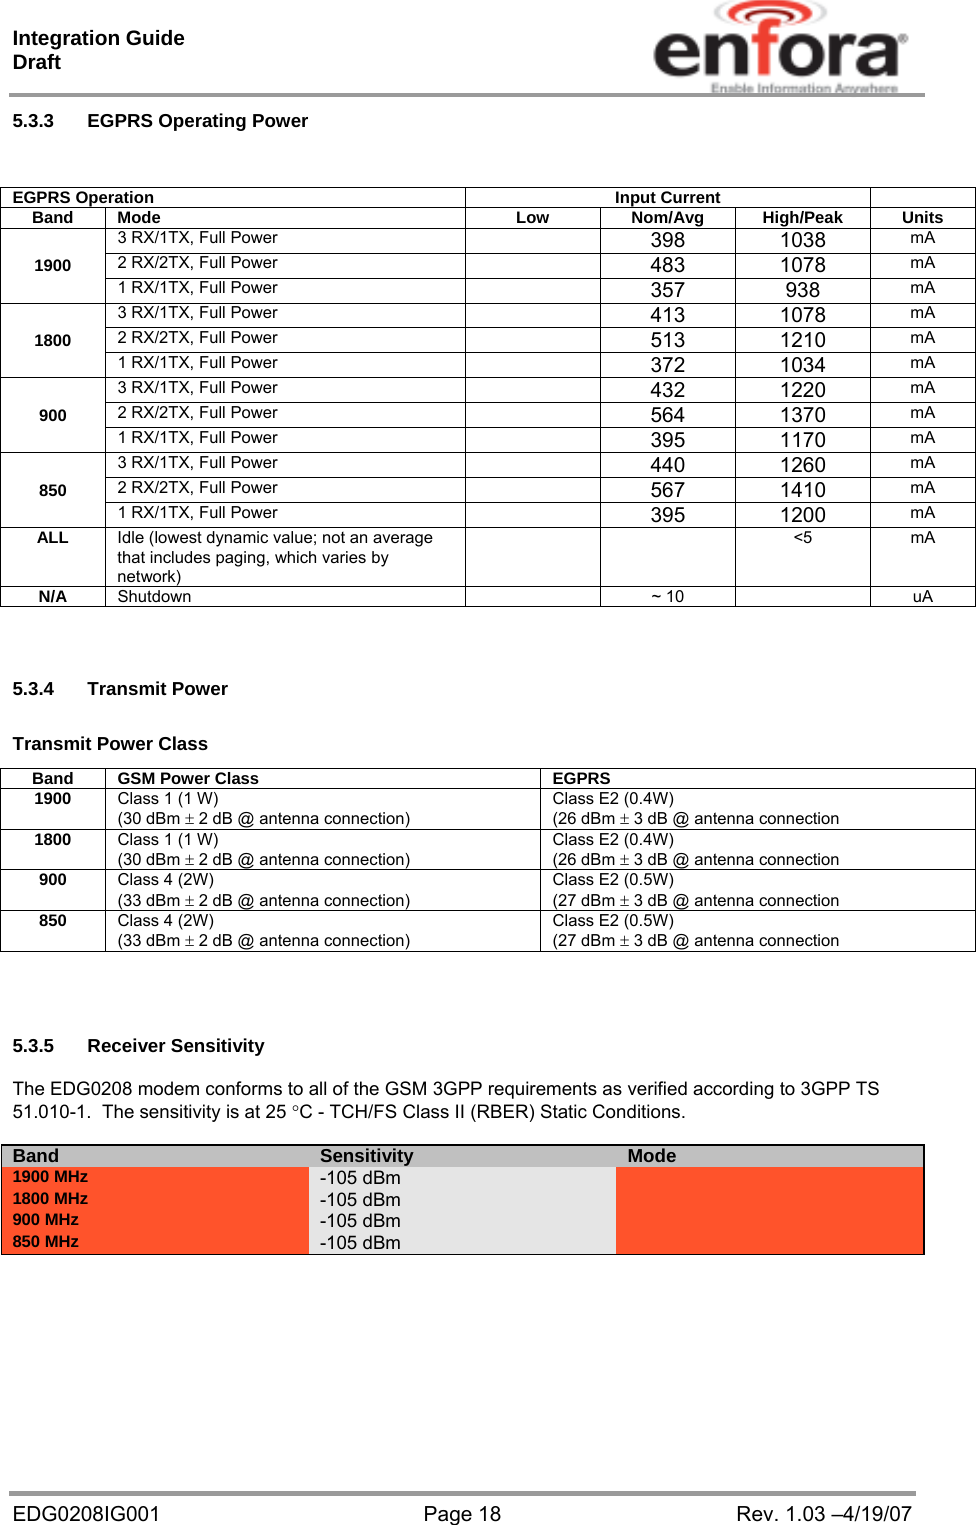 Integration Guide  Draft EDG0208IG001  Page 18  Rev. 1.03 –4/19/07 5.3.3  EGPRS Operating Power   EGPRS Operation  Input Current   Band Mode  Low  Nom/Avg  High/Peak  Units 1900 3 RX/1TX, Full Power    398 1038 mA 2 RX/2TX, Full Power    483 1078 mA 1 RX/1TX, Full Power    357 938 mA 1800 3 RX/1TX, Full Power    413 1078 mA 2 RX/2TX, Full Power    513 1210 mA 1 RX/1TX, Full Power    372 1034 mA 900 3 RX/1TX, Full Power    432 1220 mA 2 RX/2TX, Full Power    564 1370 mA 1 RX/1TX, Full Power    395 1170 mA 850 3 RX/1TX, Full Power    440 1260 mA 2 RX/2TX, Full Power    567 1410 mA 1 RX/1TX, Full Power    395 1200 mA ALL  Idle (lowest dynamic value; not an average that includes paging, which varies by network)   &lt;5 mA N/A  Shutdown    ~ 10     uA    5.3.4 Transmit Power  Transmit Power Class Band  GSM Power Class  EGPRS 1900  Class 1 (1 W) (30 dBm  2 dB @ antenna connection) Class E2 (0.4W) (26 dBm  3 dB @ antenna connection 1800  Class 1 (1 W) (30 dBm  2 dB @ antenna connection) Class E2 (0.4W) (26 dBm  3 dB @ antenna connection 900  Class 4 (2W) (33 dBm  2 dB @ antenna connection) Class E2 (0.5W) (27 dBm  3 dB @ antenna connection 850  Class 4 (2W) (33 dBm  2 dB @ antenna connection) Class E2 (0.5W) (27 dBm  3 dB @ antenna connection    5.3.5 Receiver Sensitivity  The EDG0208 modem conforms to all of the GSM 3GPP requirements as verified according to 3GPP TS 51.010-1.  The sensitivity is at 25 C - TCH/FS Class II (RBER) Static Conditions.  Band Sensitivity Mode1900 MHz -105 dBm 1800 MHz  -105 dBm 900 MHz  -105 dBm 850 MHz -105 dBm   